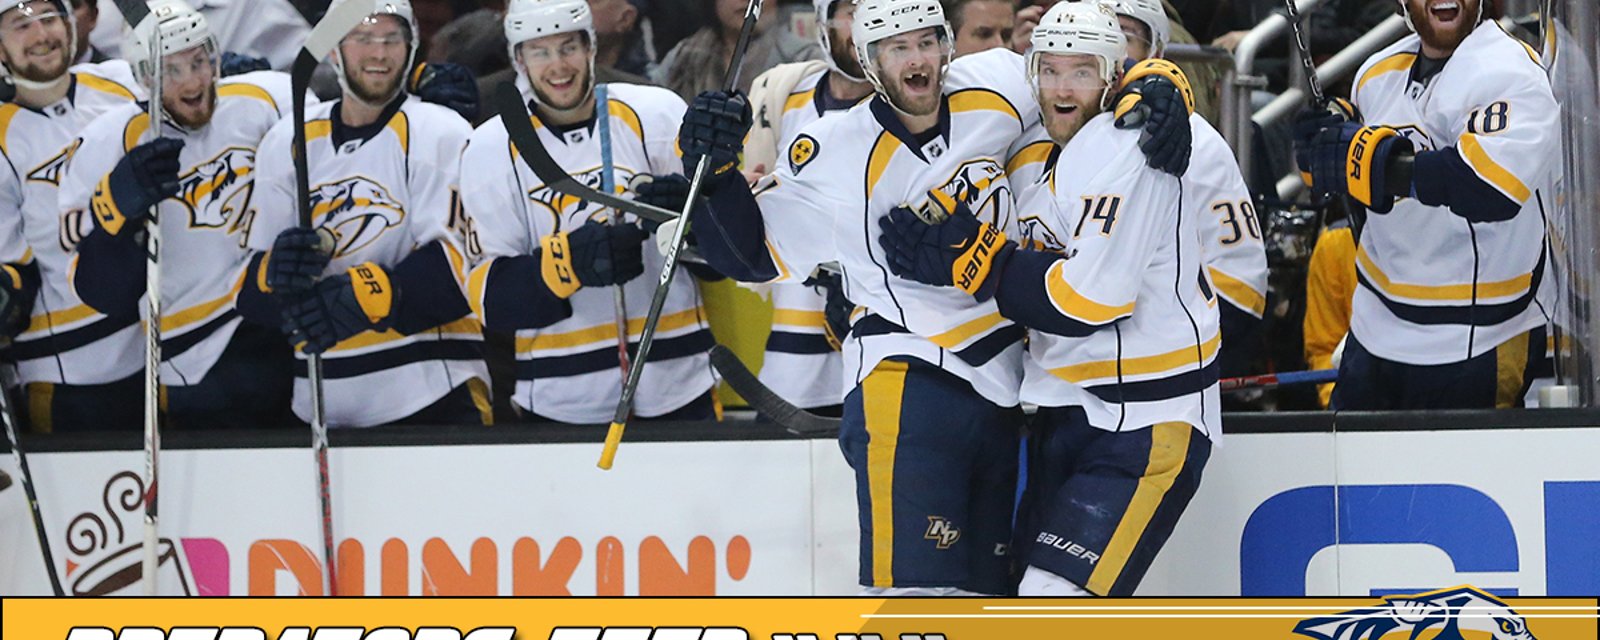 Gotta See It: Former Preds captain secretly cheering on team, despite working for another!